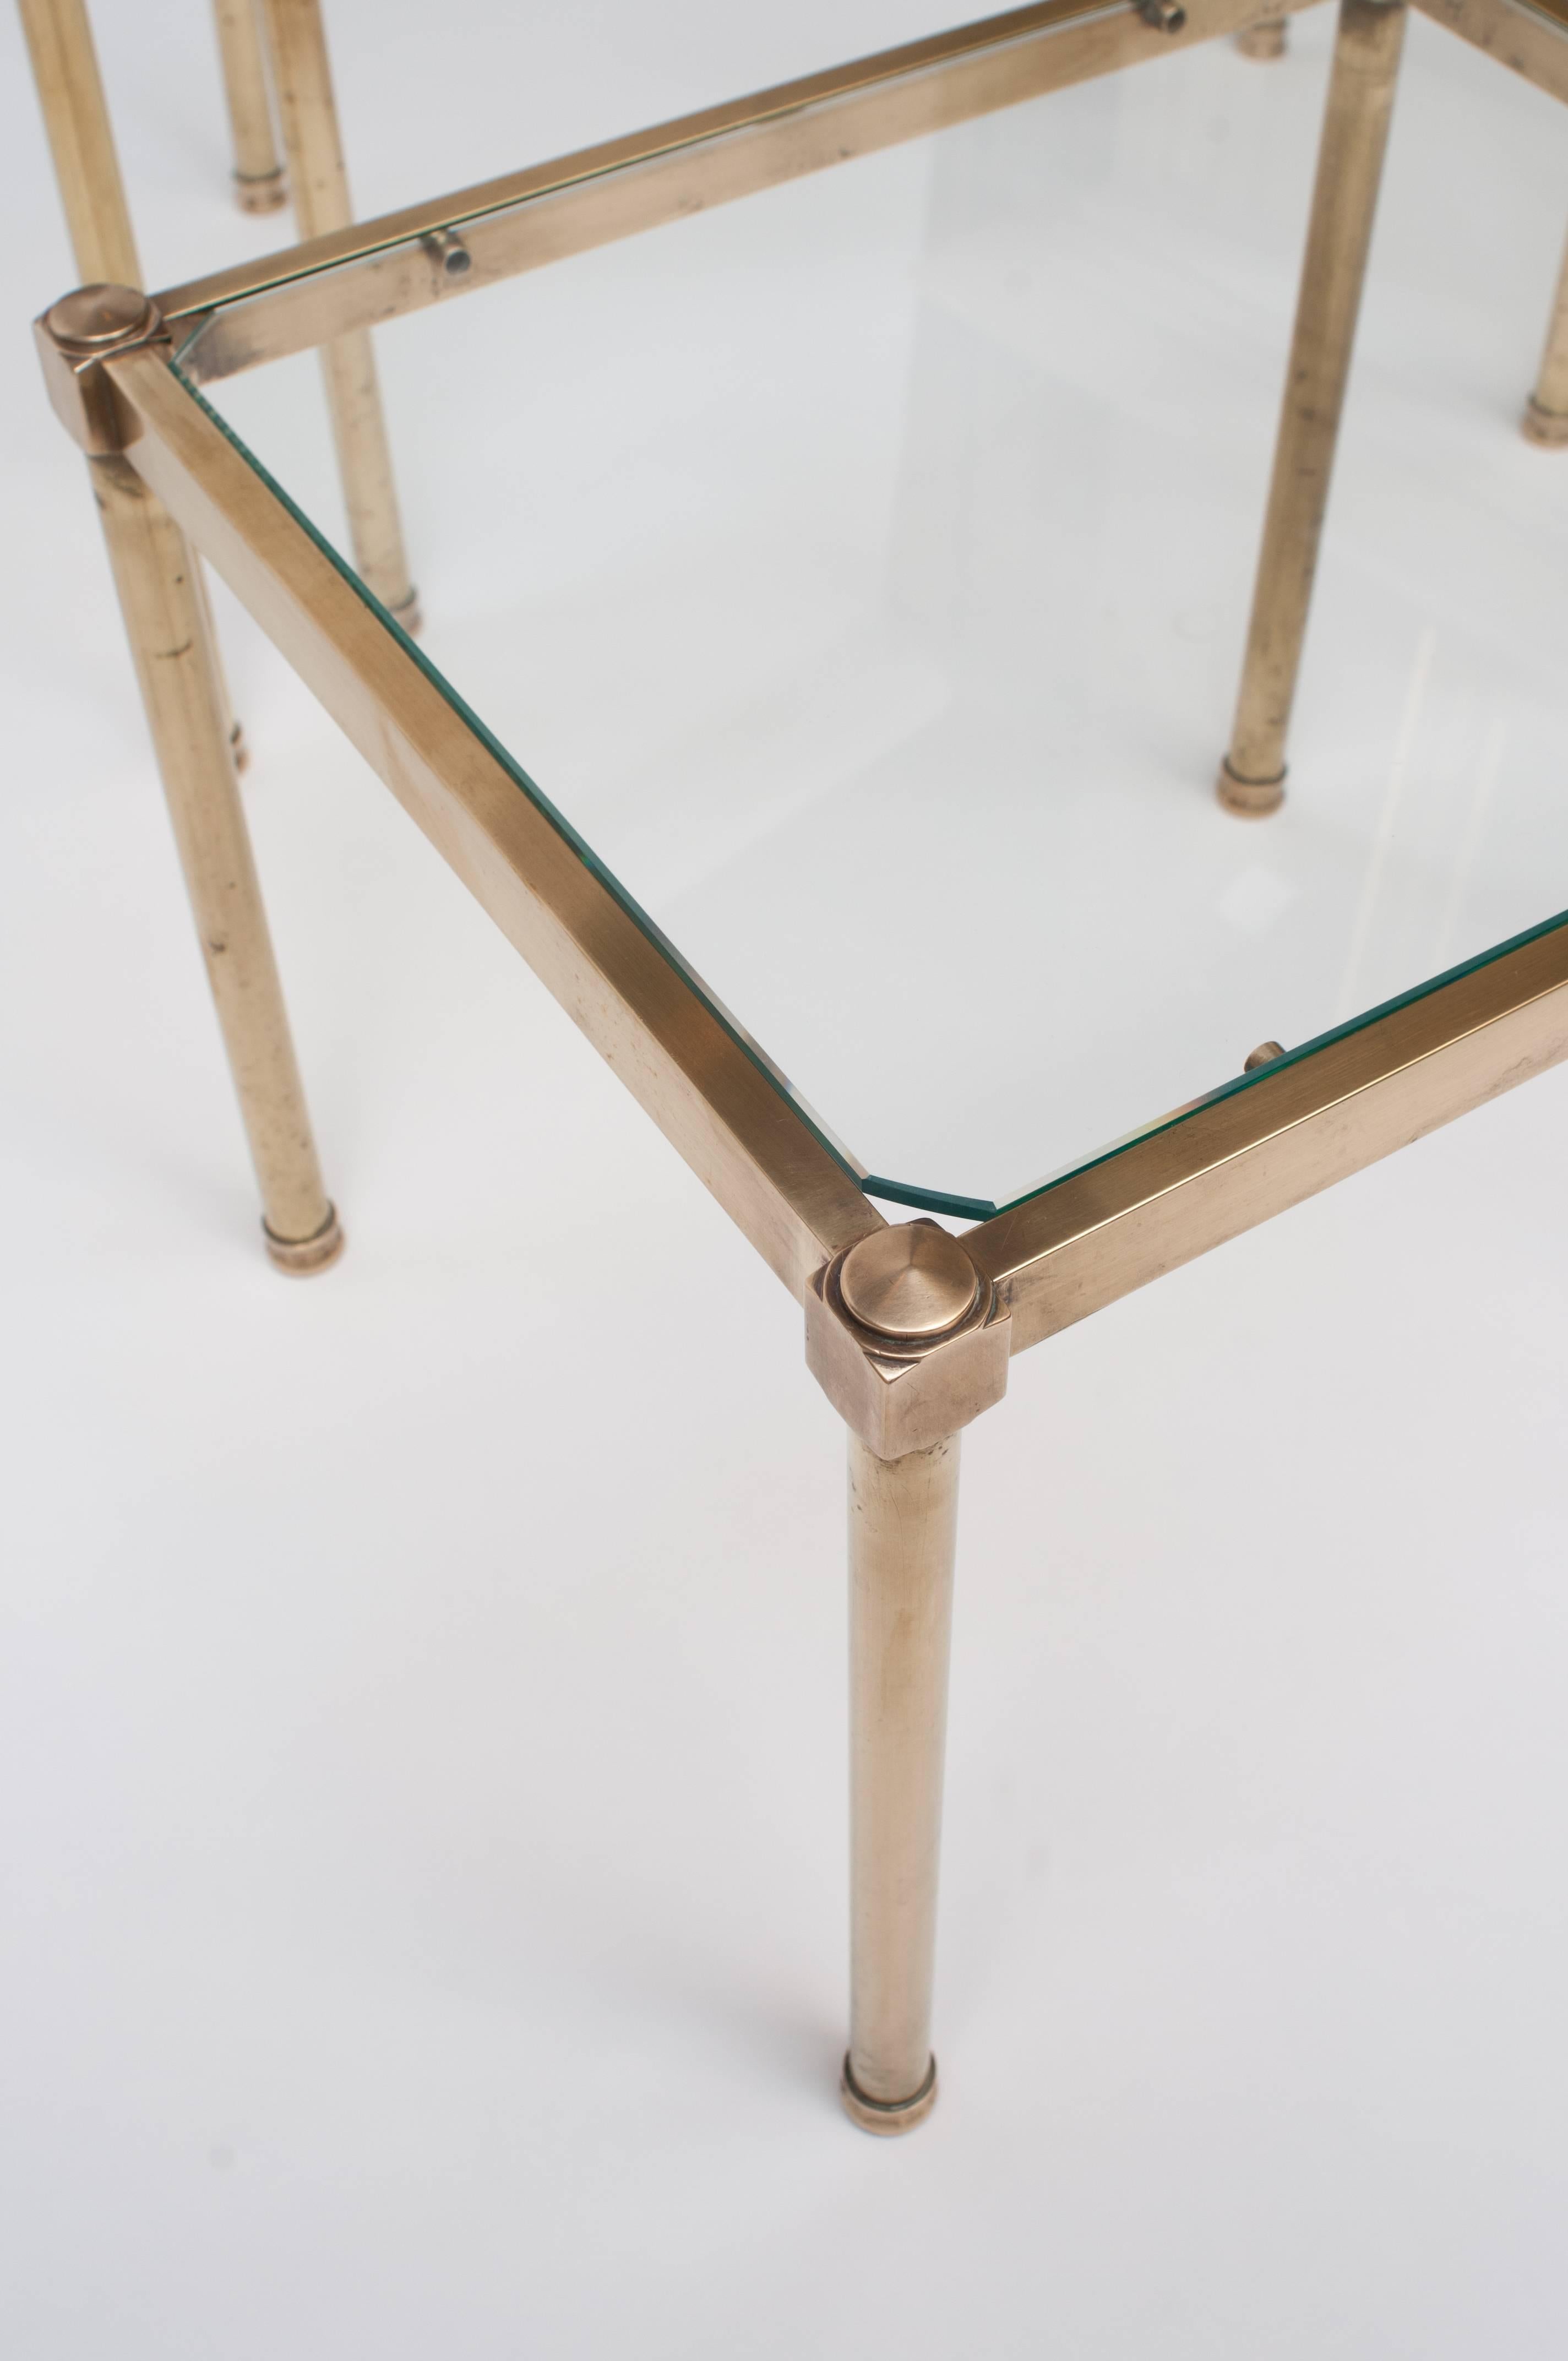 Finely cast brass with inset glass tops. Glass has canted corners. When separated they make excellent small side tables. Measurements: smallest: 15.75" long x 13.75" deep x 13" tall; medium: 17.75" long x 13.75" deep x